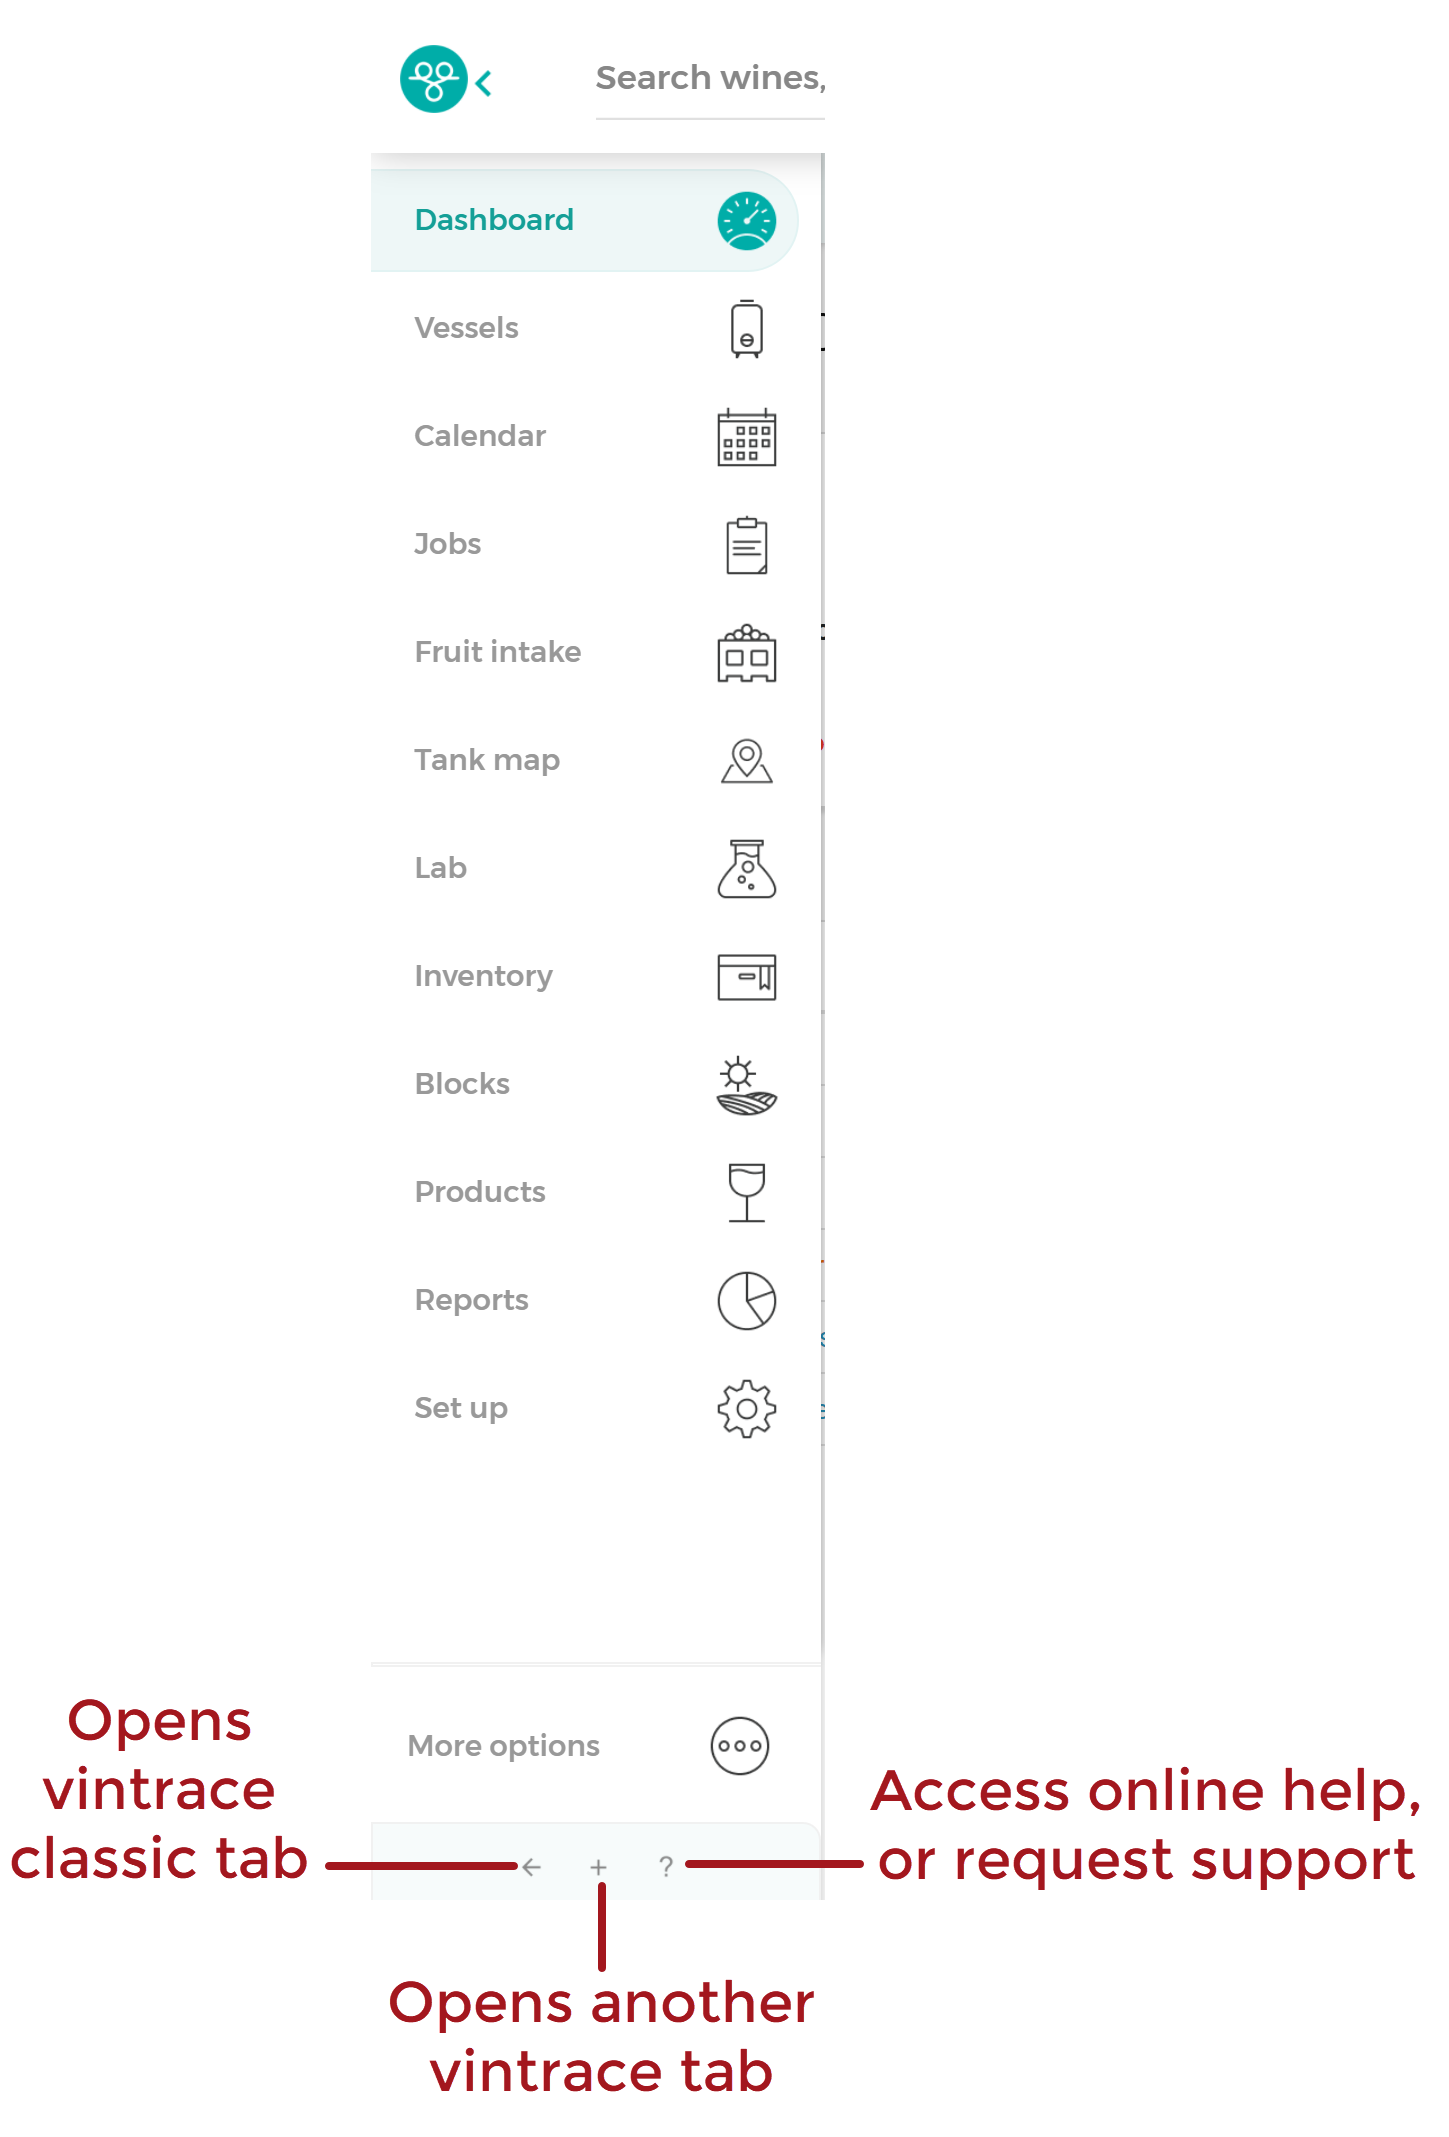 Sidebar_Bottom_Icons_Annotated_20200917.png